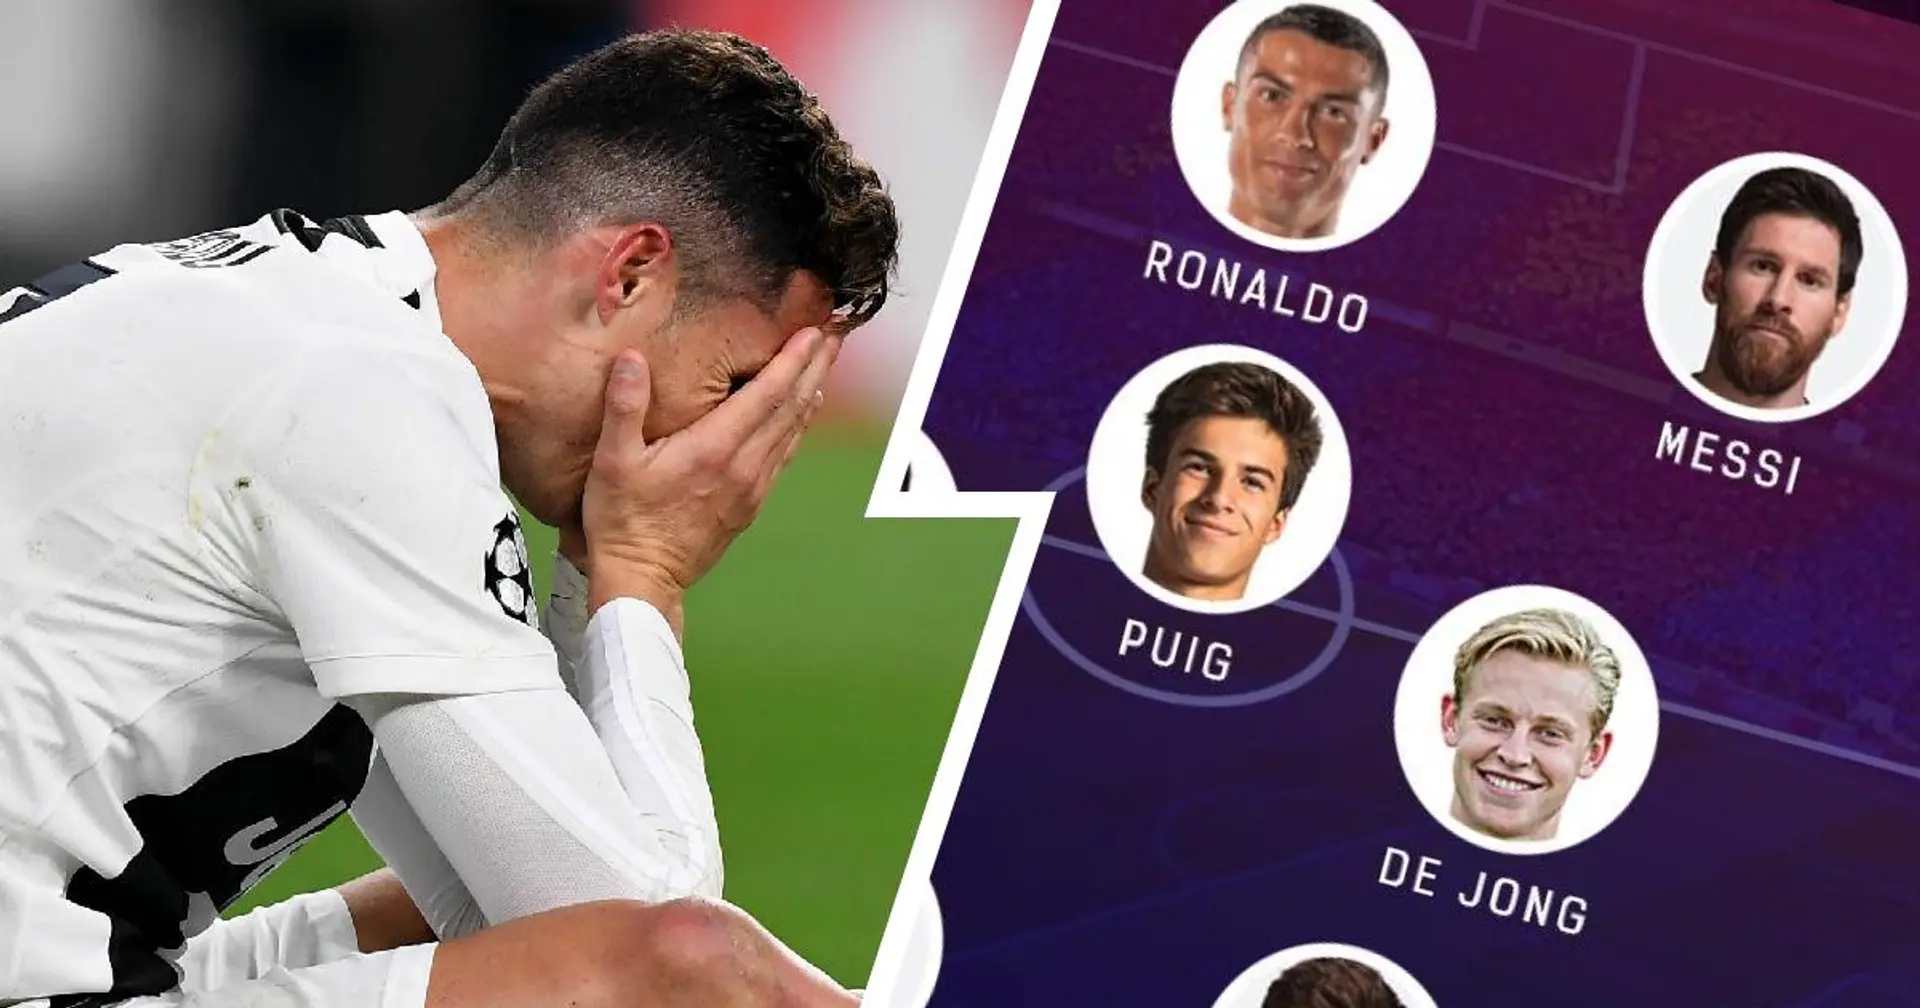 'Ronaldo and Messi together would be better than porn' – but here's why any Barca lineup would be better without Cristiano